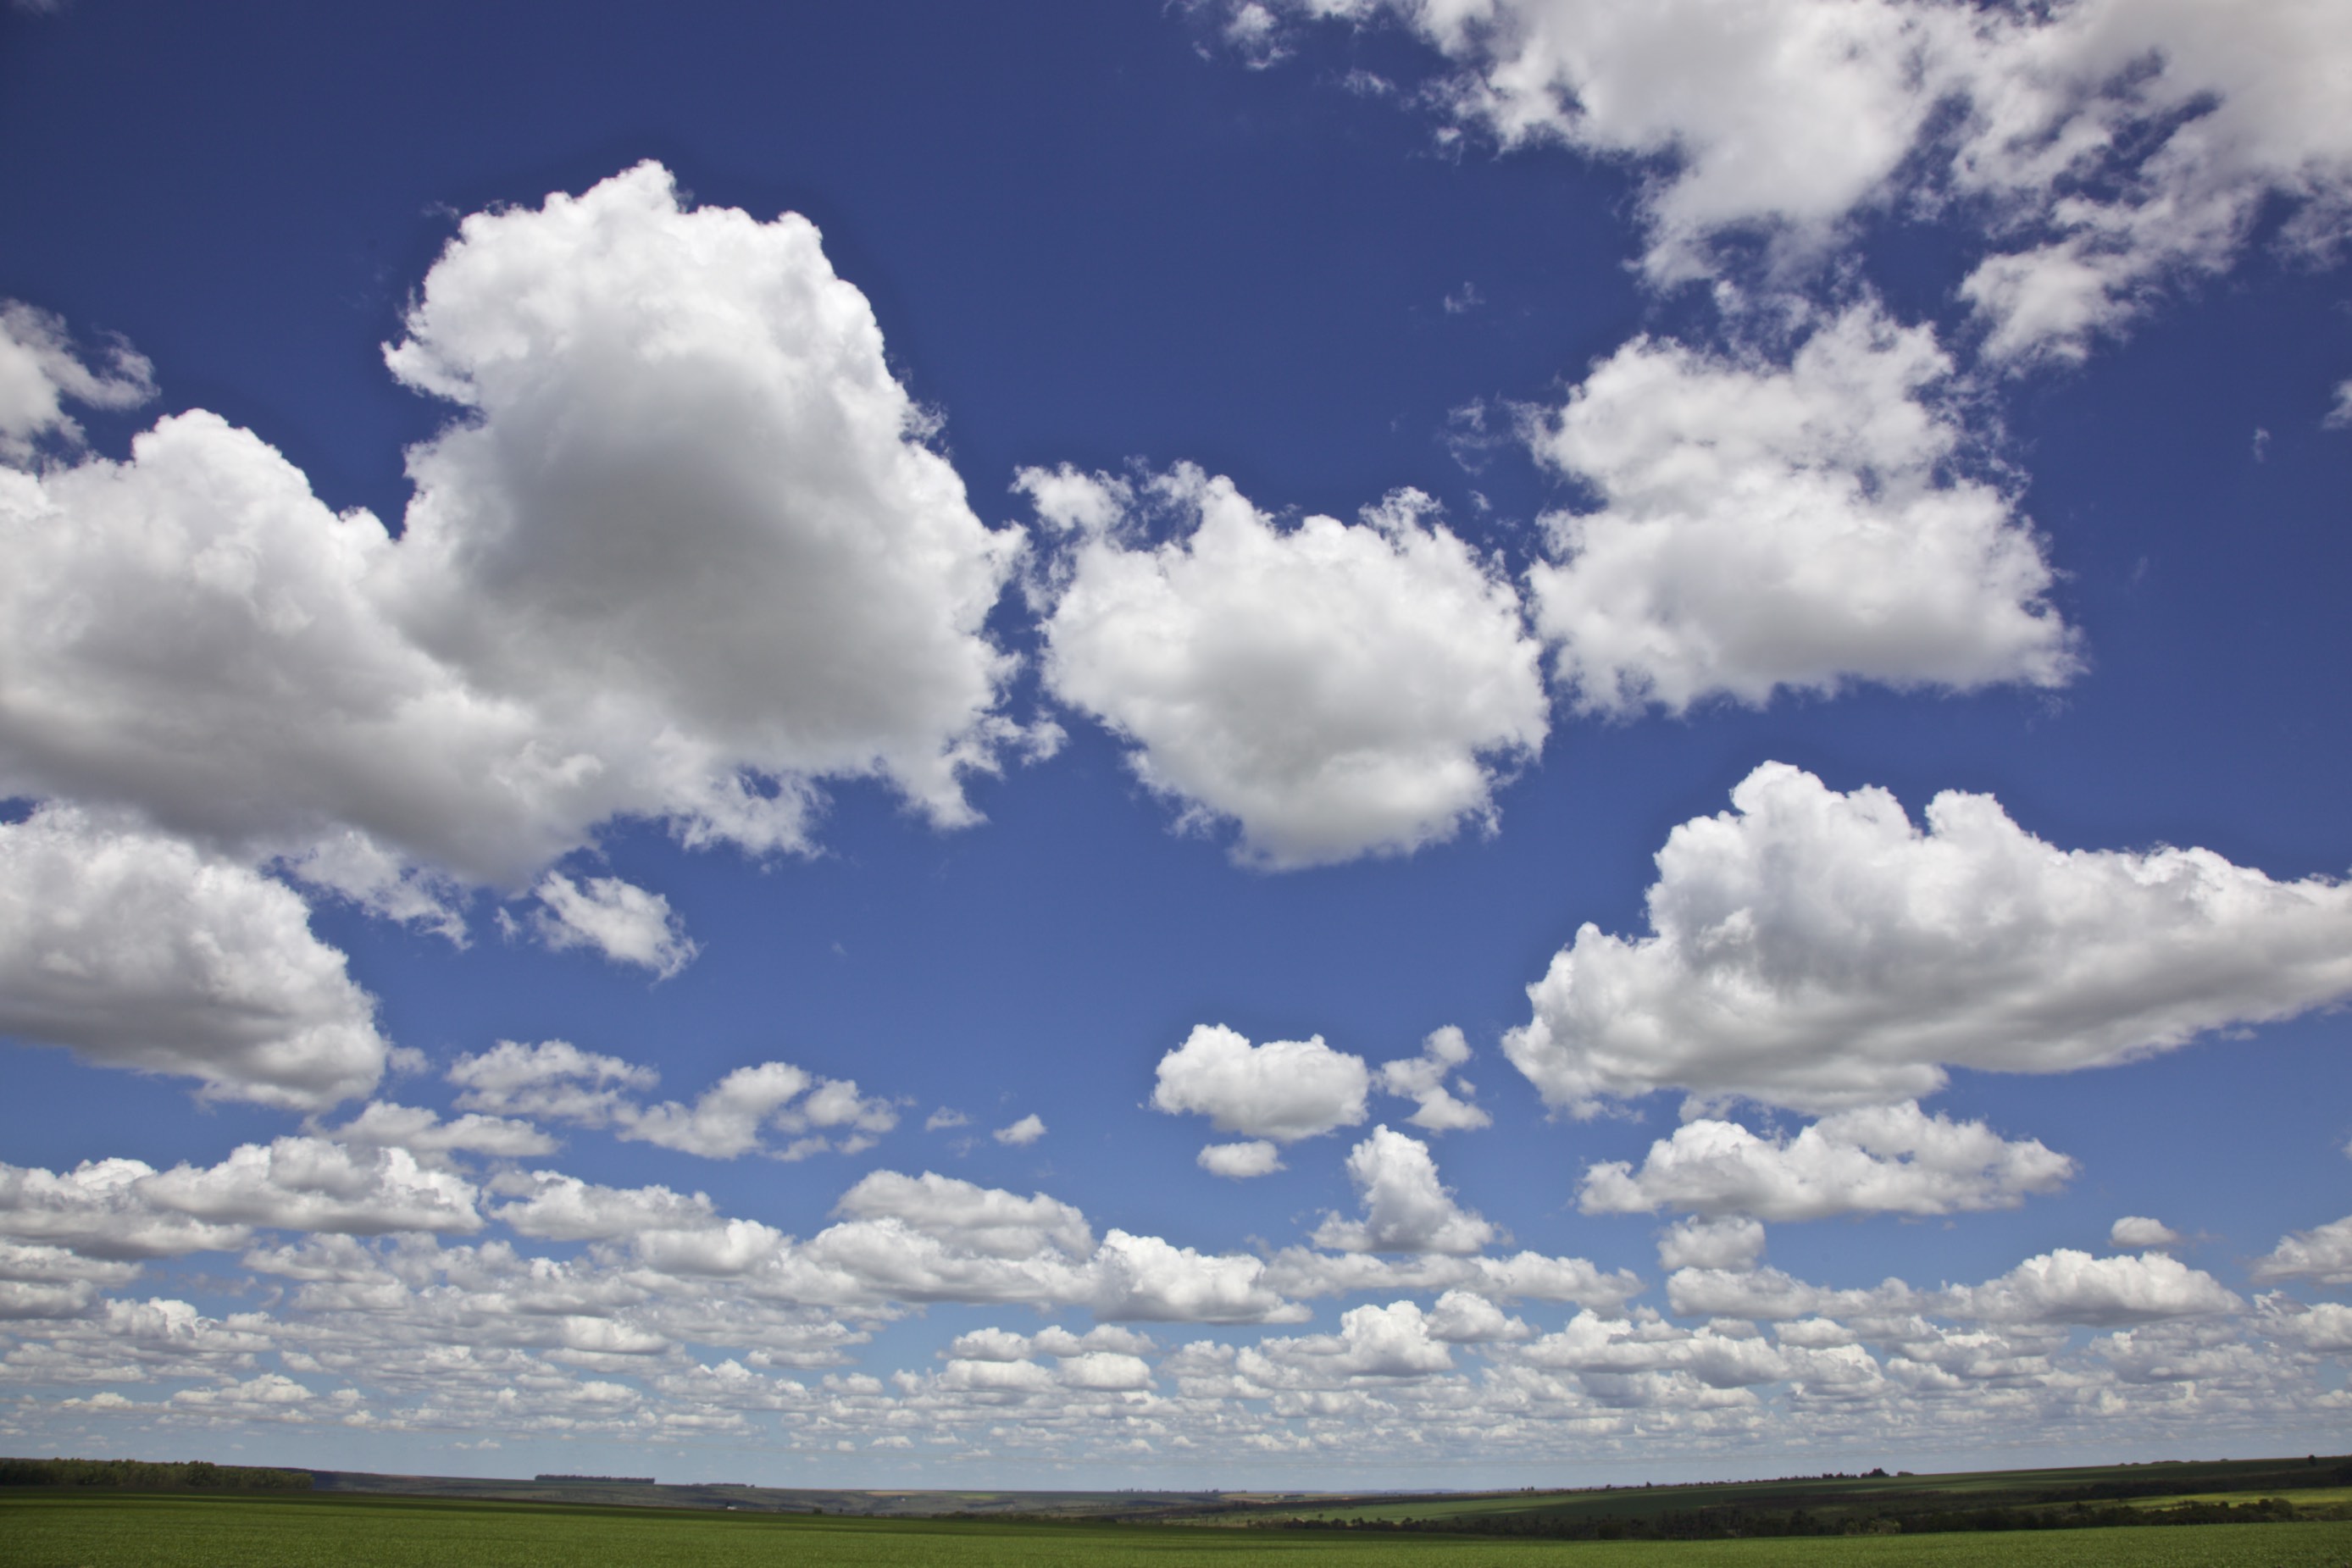 Nature Cloud HD Wallpaper | Background Image